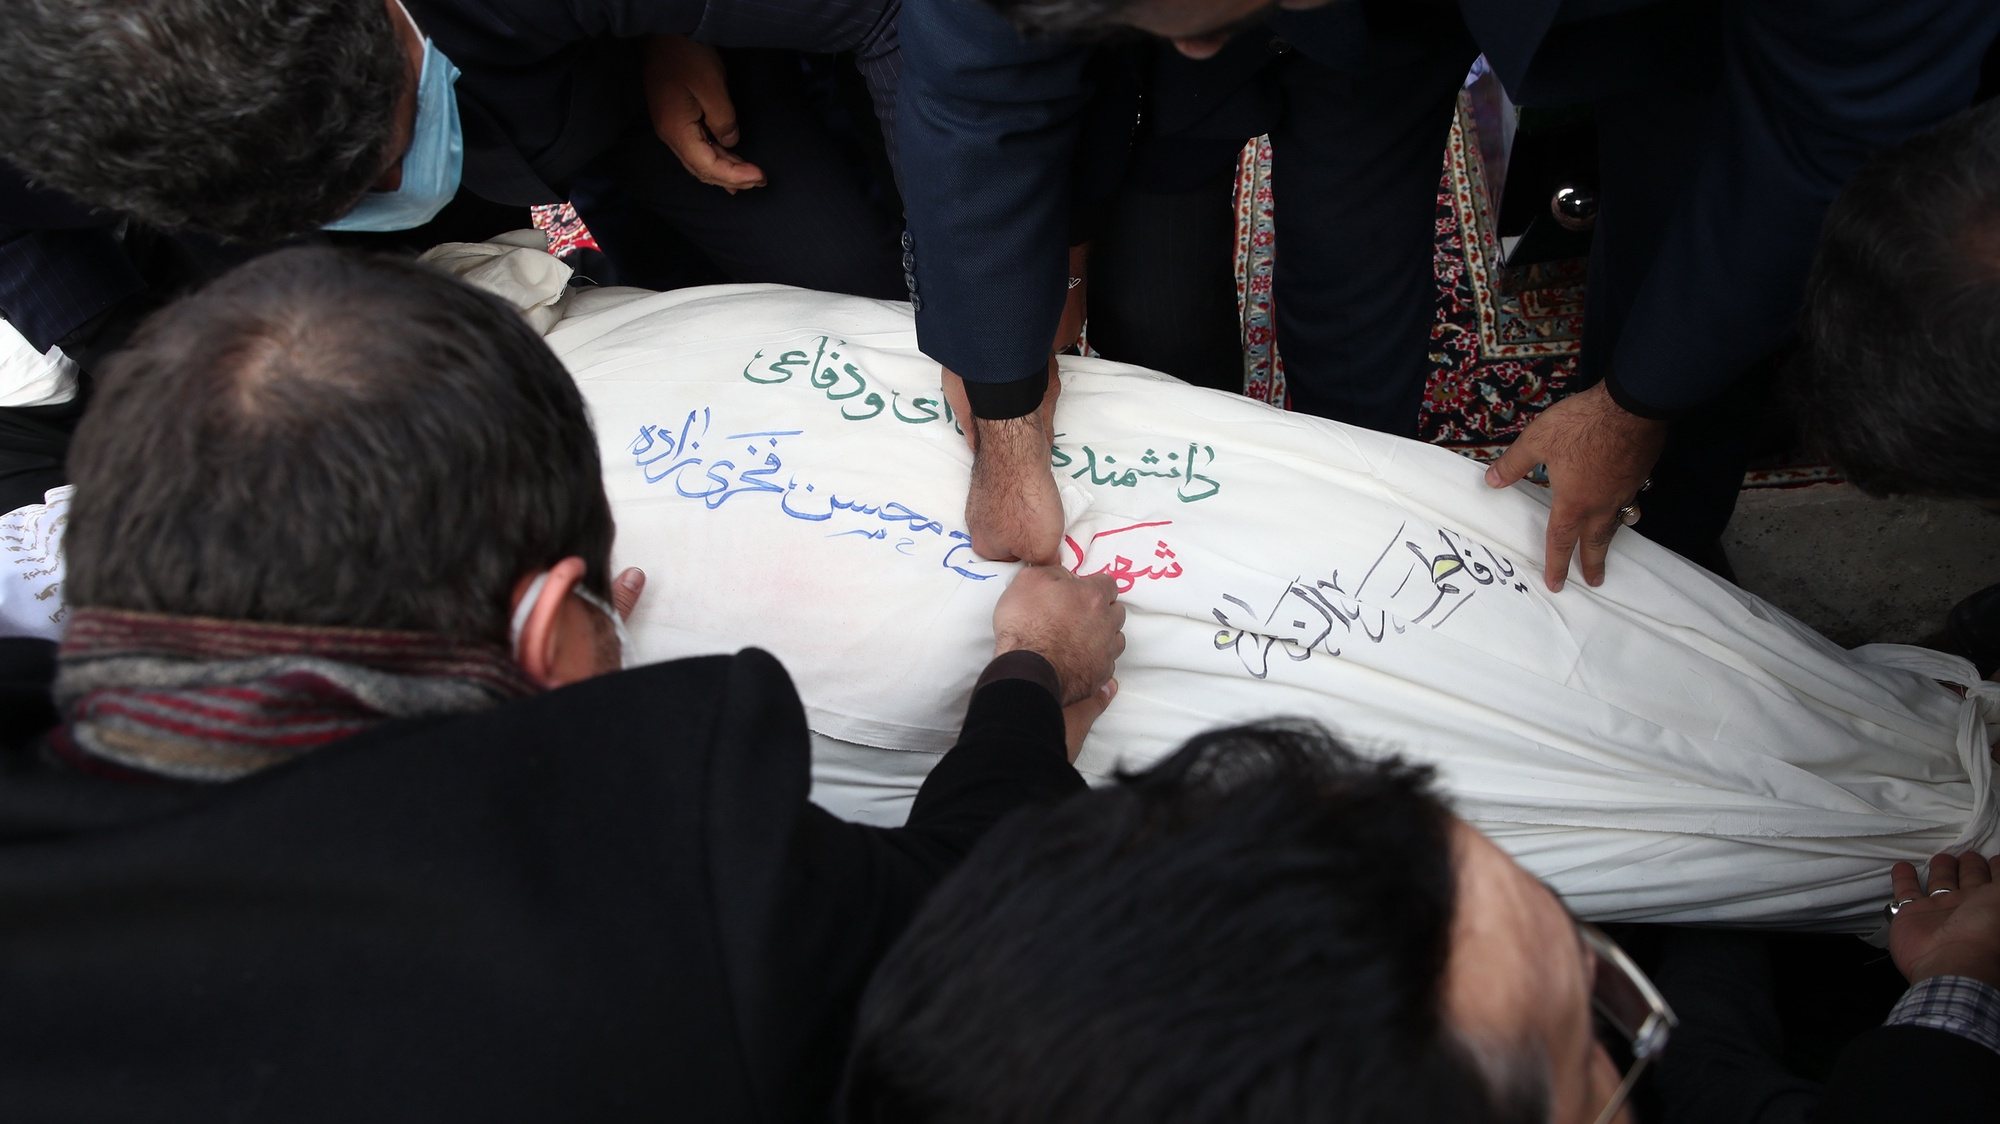 epa08853374 A handout photo made available by the Iranian defence ministry office shows relatives and officials prays over the body of slain Iranian nuclear scientist Mohsen Fakhrizadeh during the burial ceremony at Saleh shrine in northern Tehran, Iran, 30 November 2020. Media reported that Iran blamed Israel for the assassination of Mohsen Fakhrizadeh, a senior Iranian nuclear scientist.  EPA/DEFENCE MINISTRY OFFICE HANDOUT  HANDOUT EDITORIAL USE ONLY/NO SALES